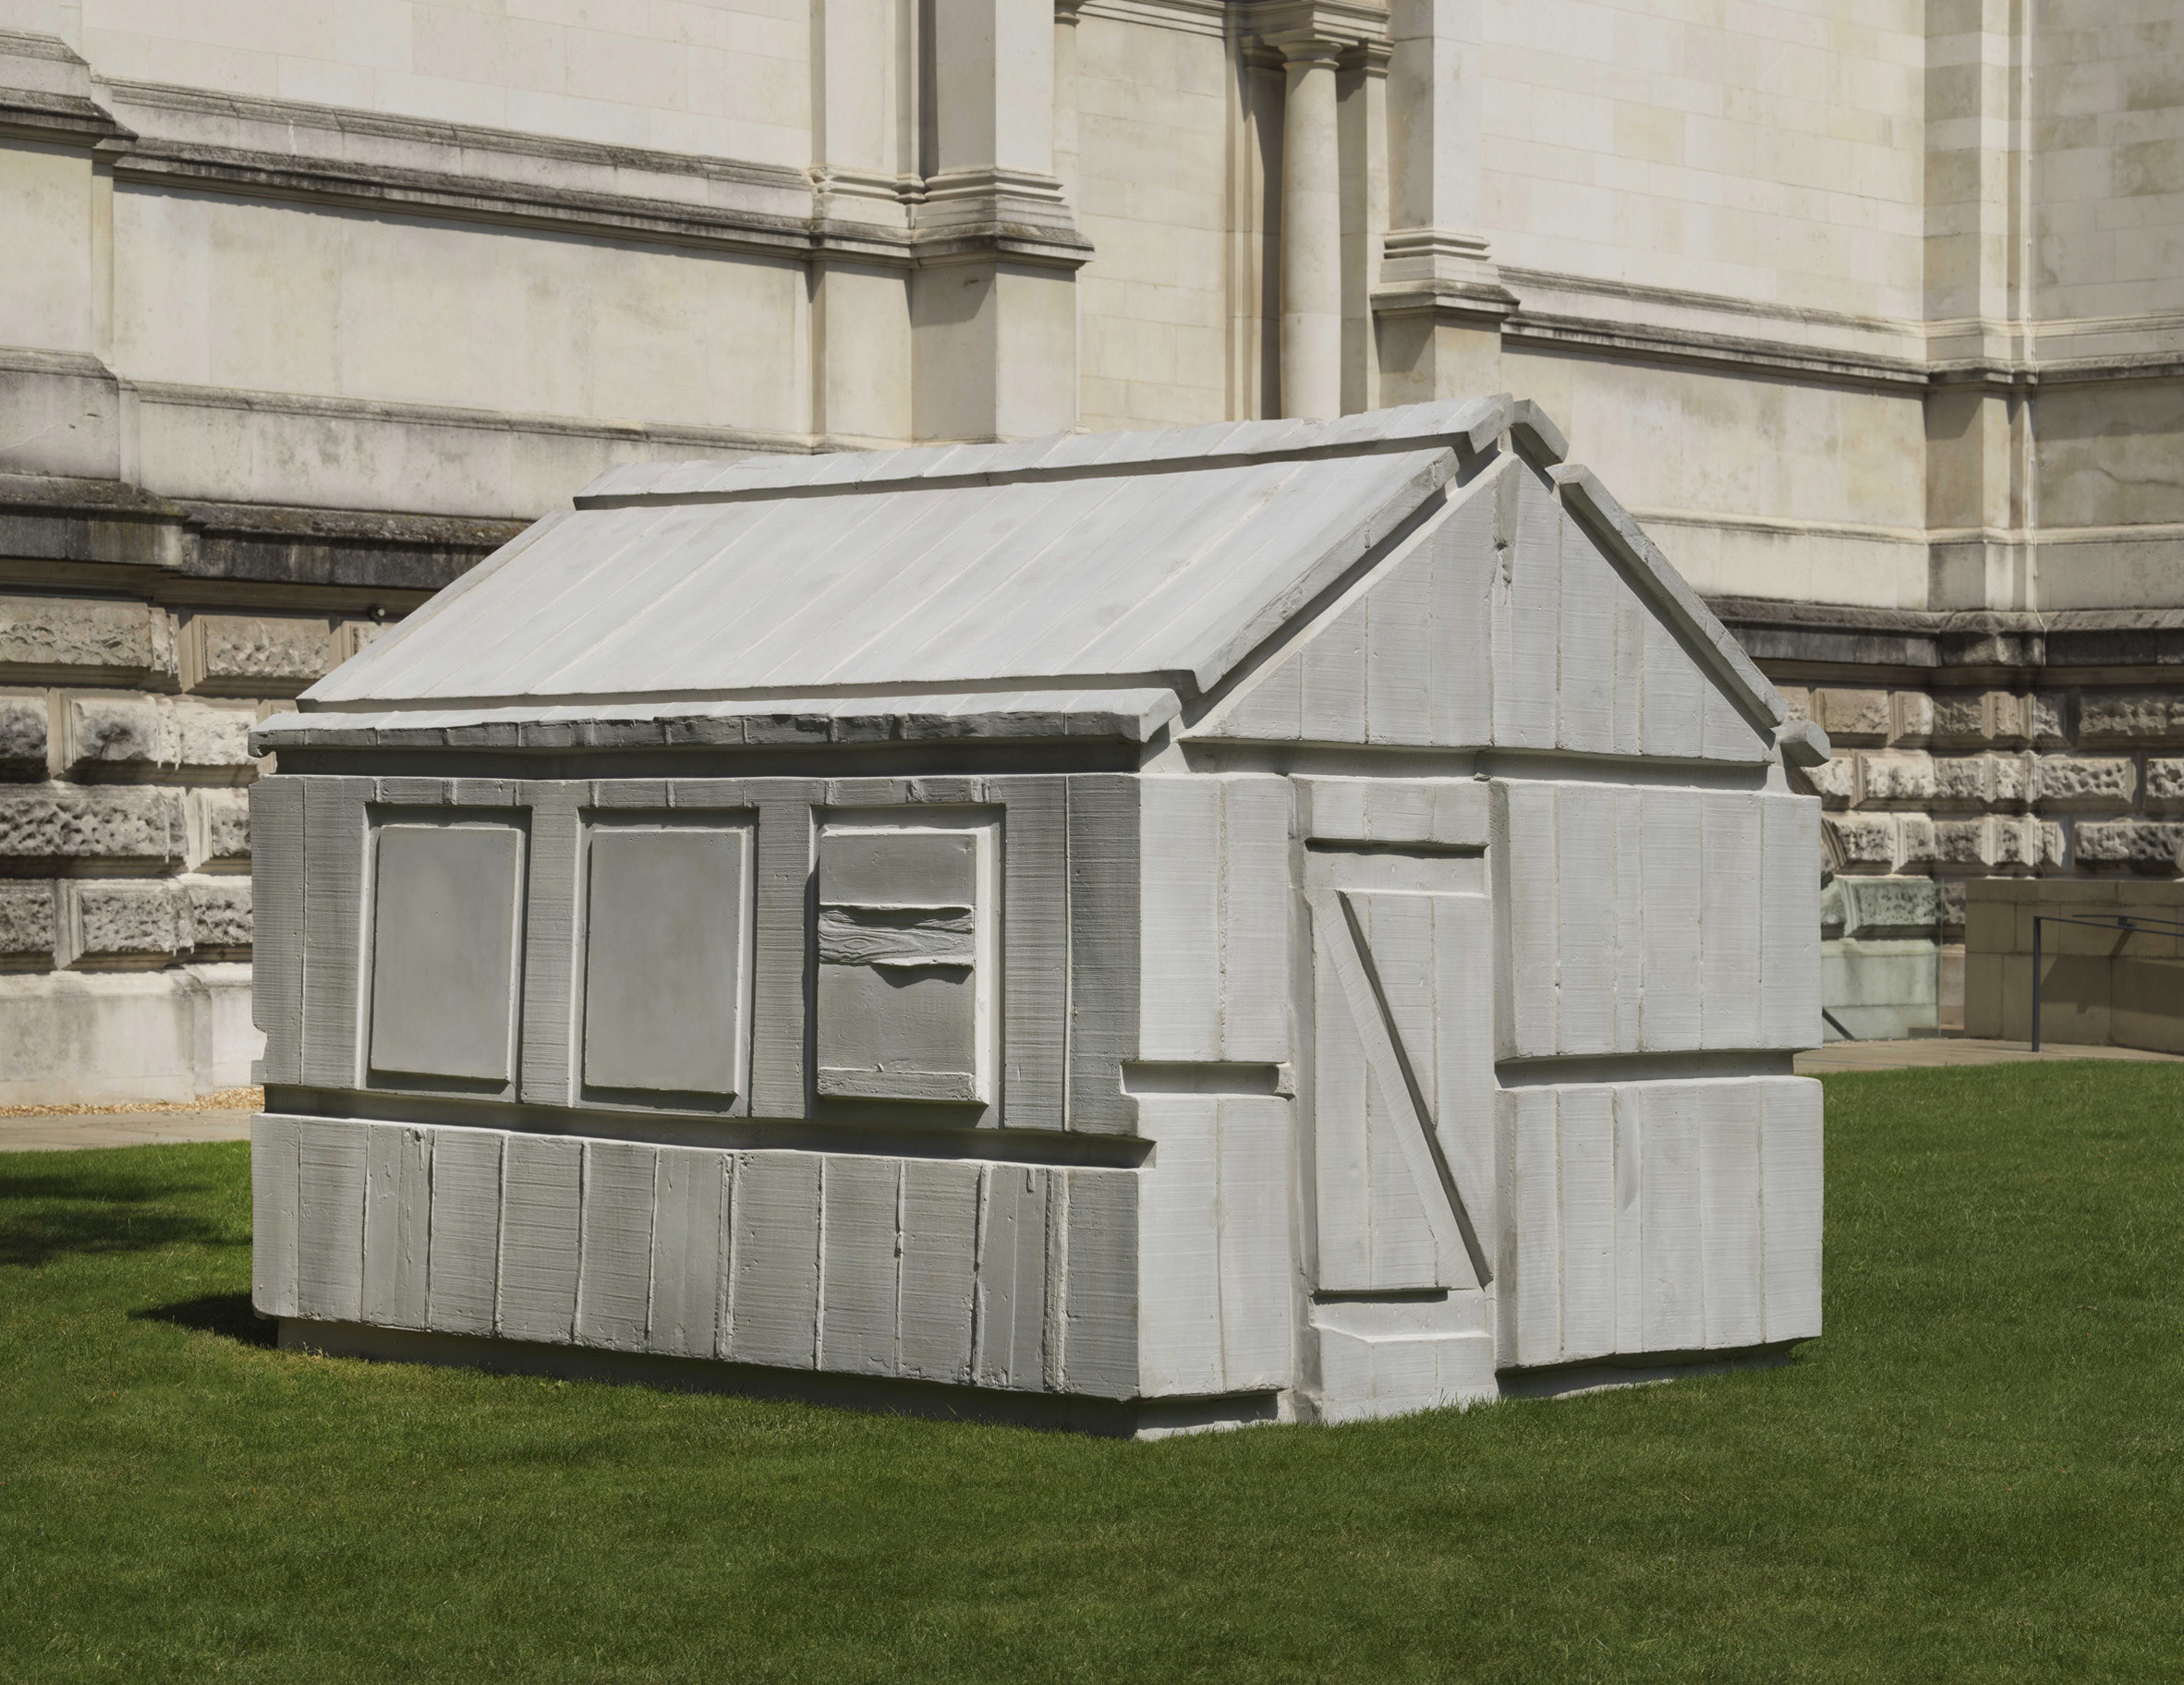 Tate Britain commemorates over three decades-worth of work by contemporary artist Rachel Whiteread